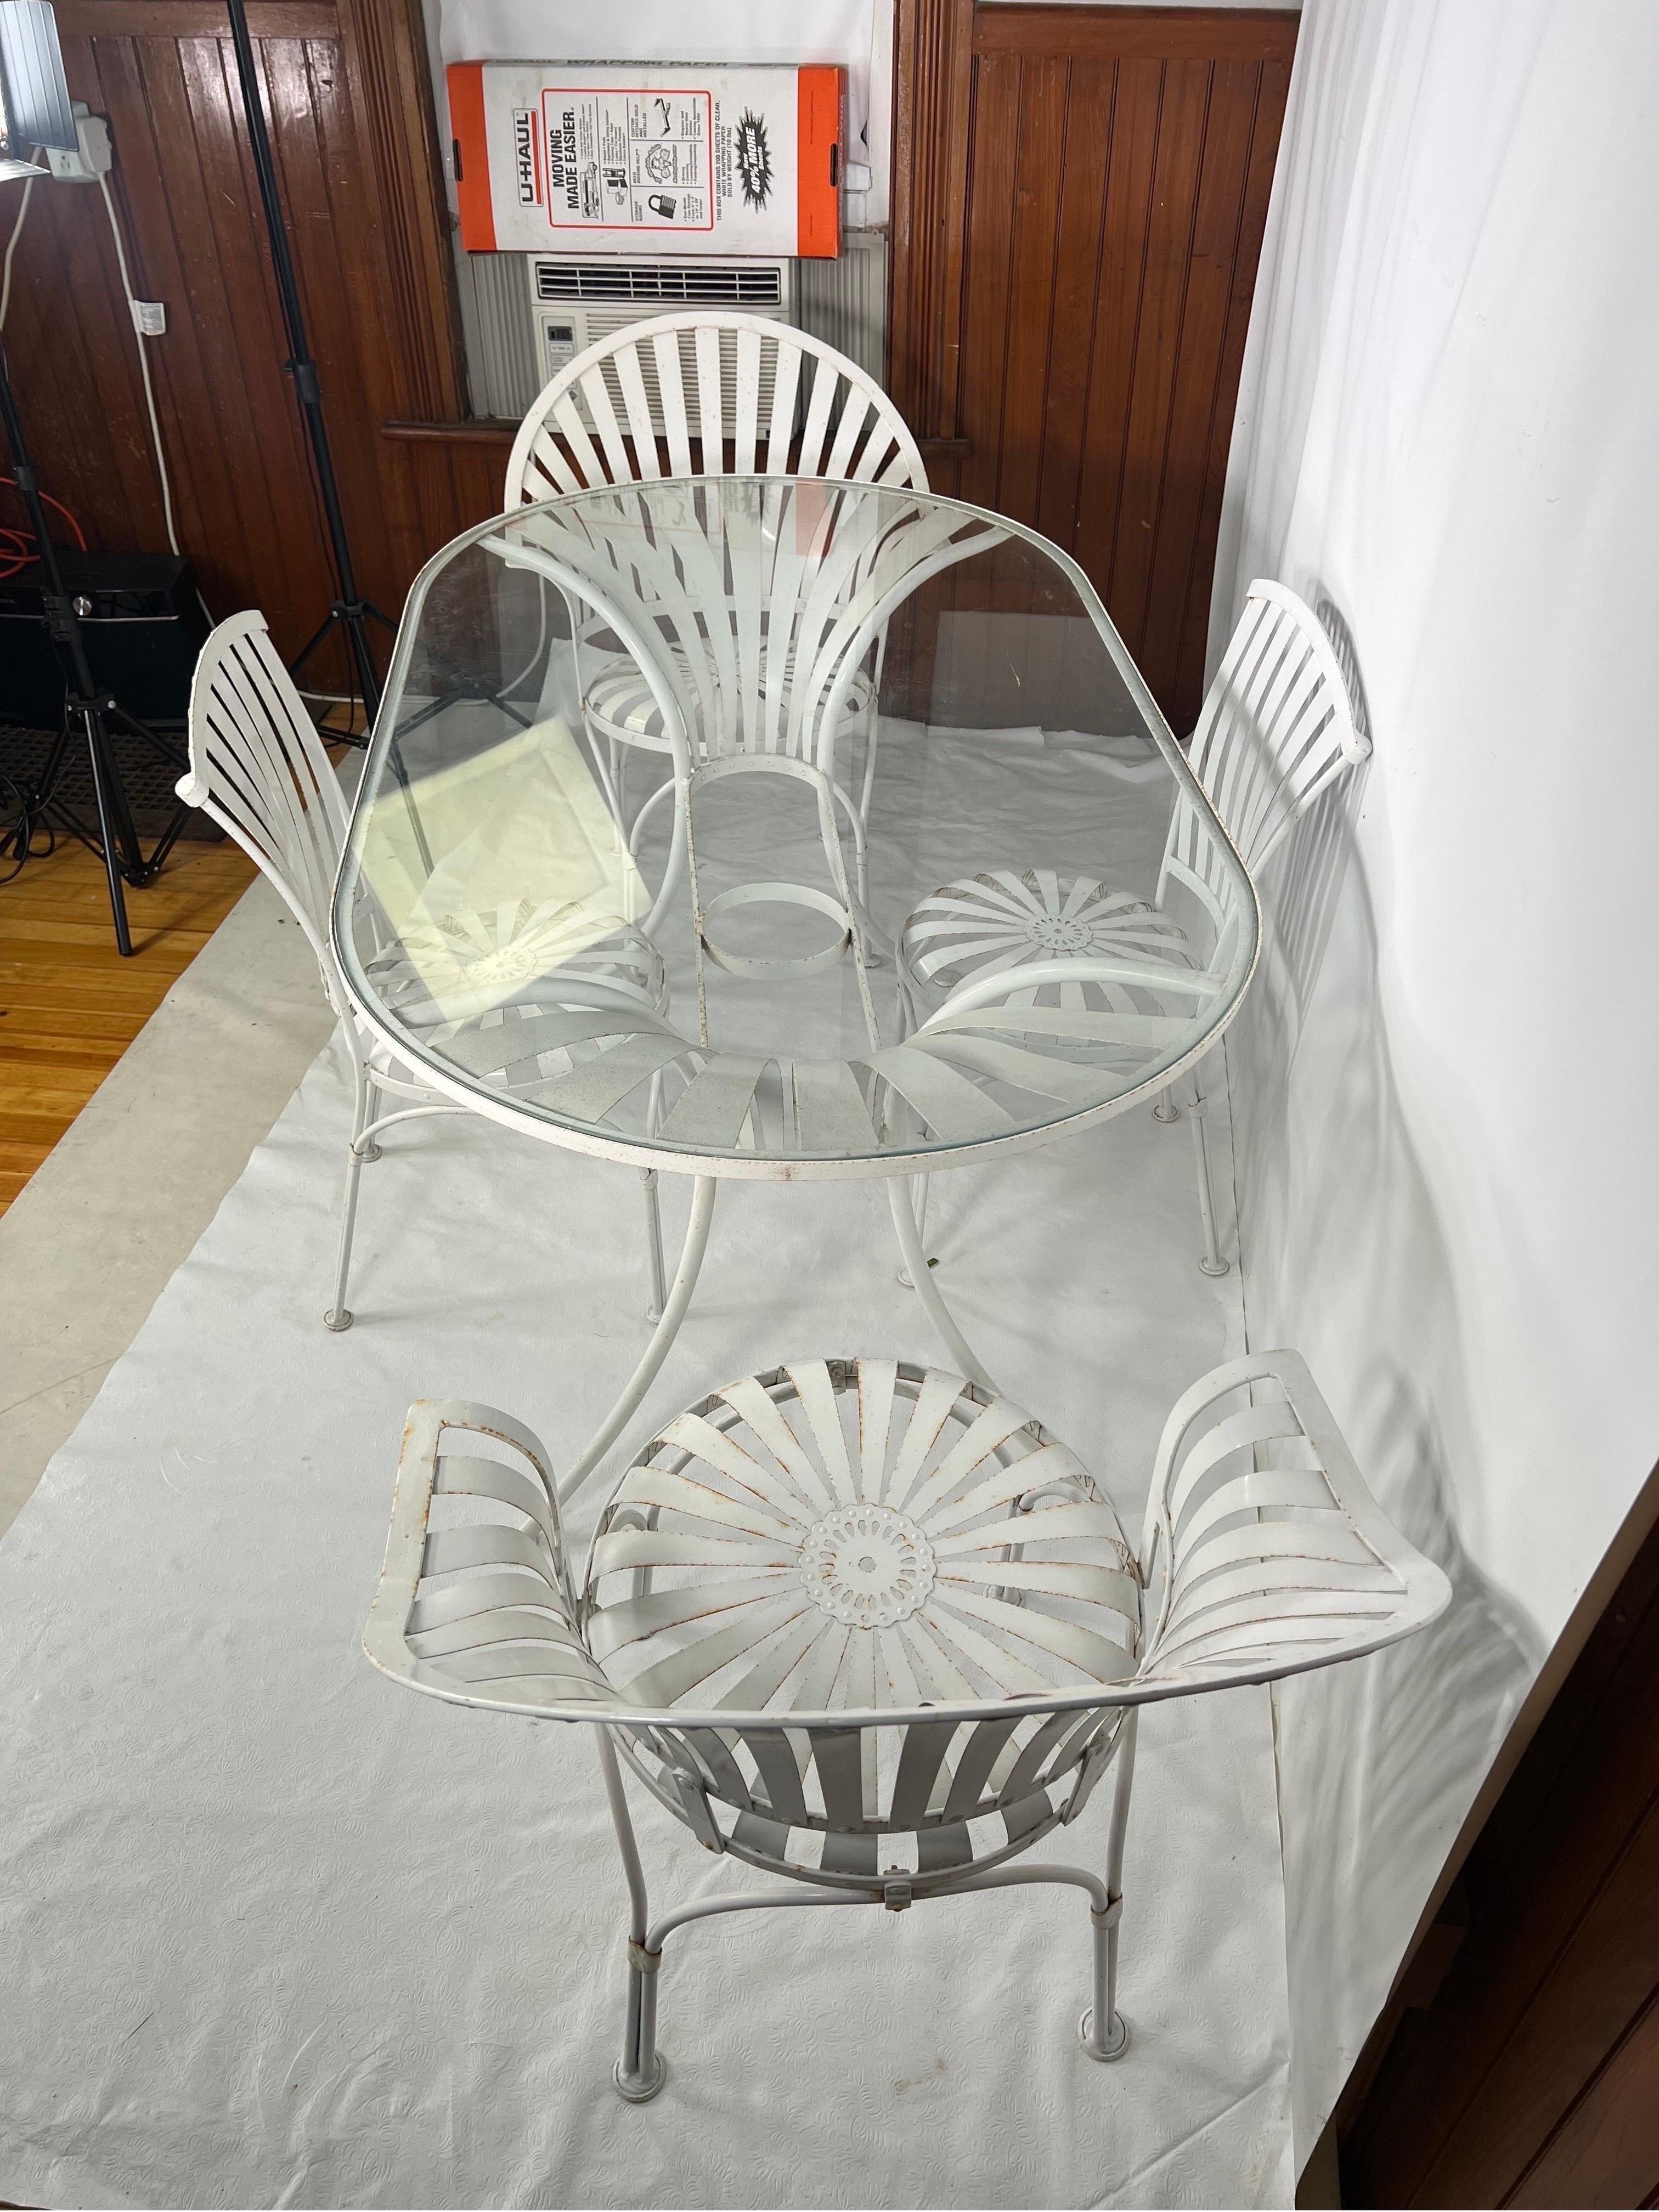 Francois Carre Patio Table and Chairs - 5 Piece Set

French iron garden set by Francois Carre, with glass top table, two spring arm chairs , and two armless spring chairs.

The table measure 60.5 W 33 3/4th D 29 3/4th H
Arm chairs measure 26.75 W 18